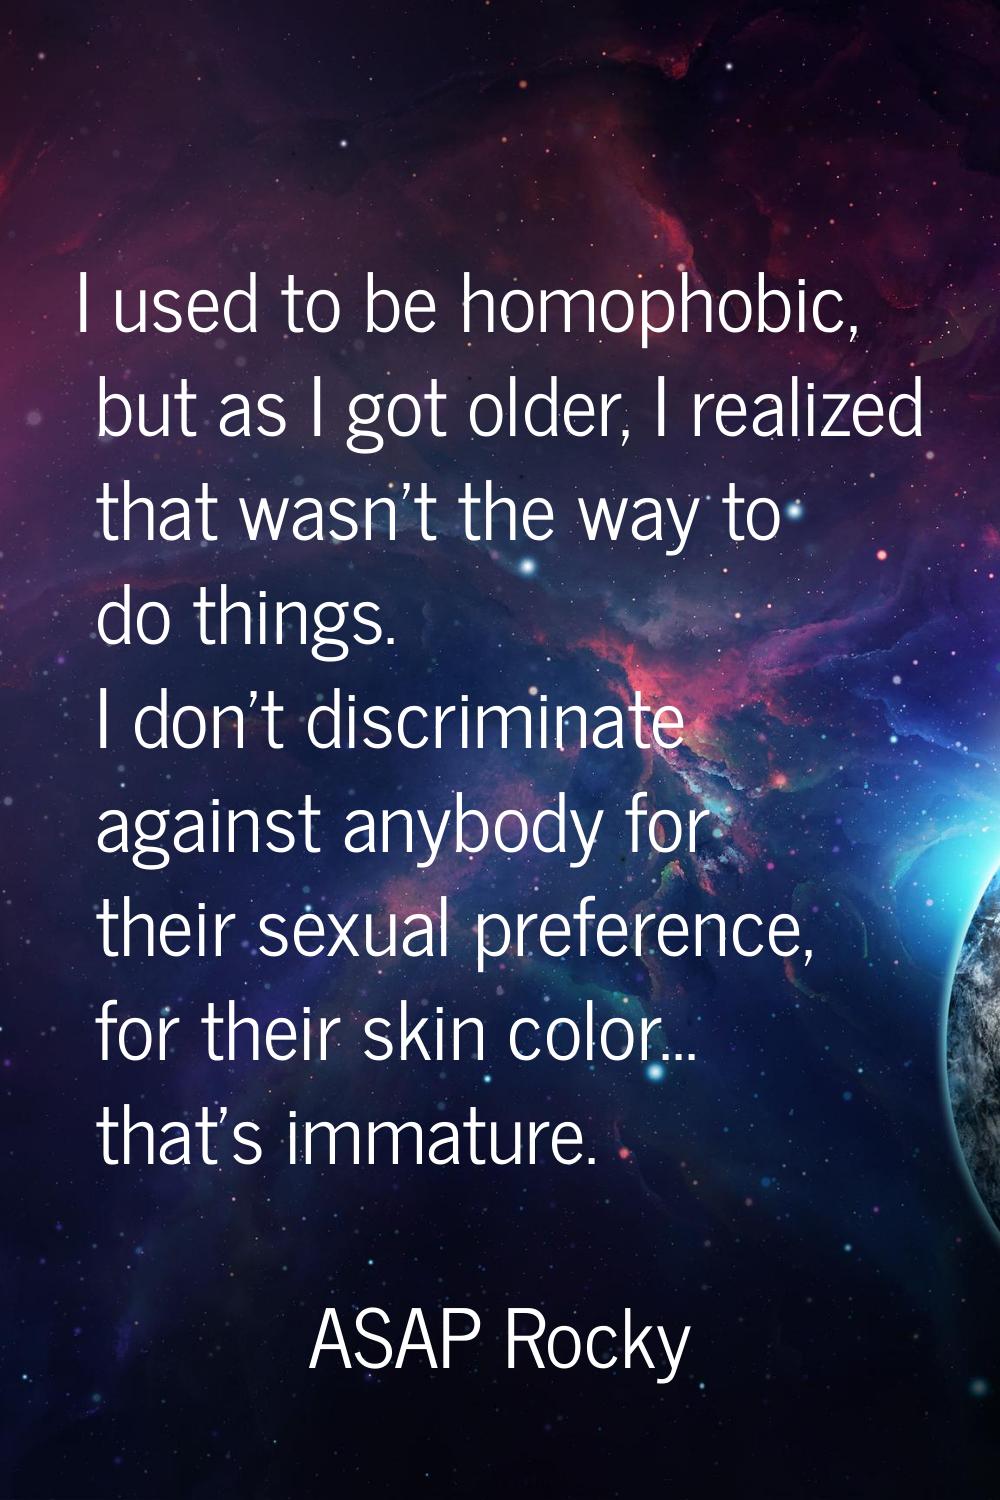 I used to be homophobic, but as I got older, I realized that wasn't the way to do things. I don't d